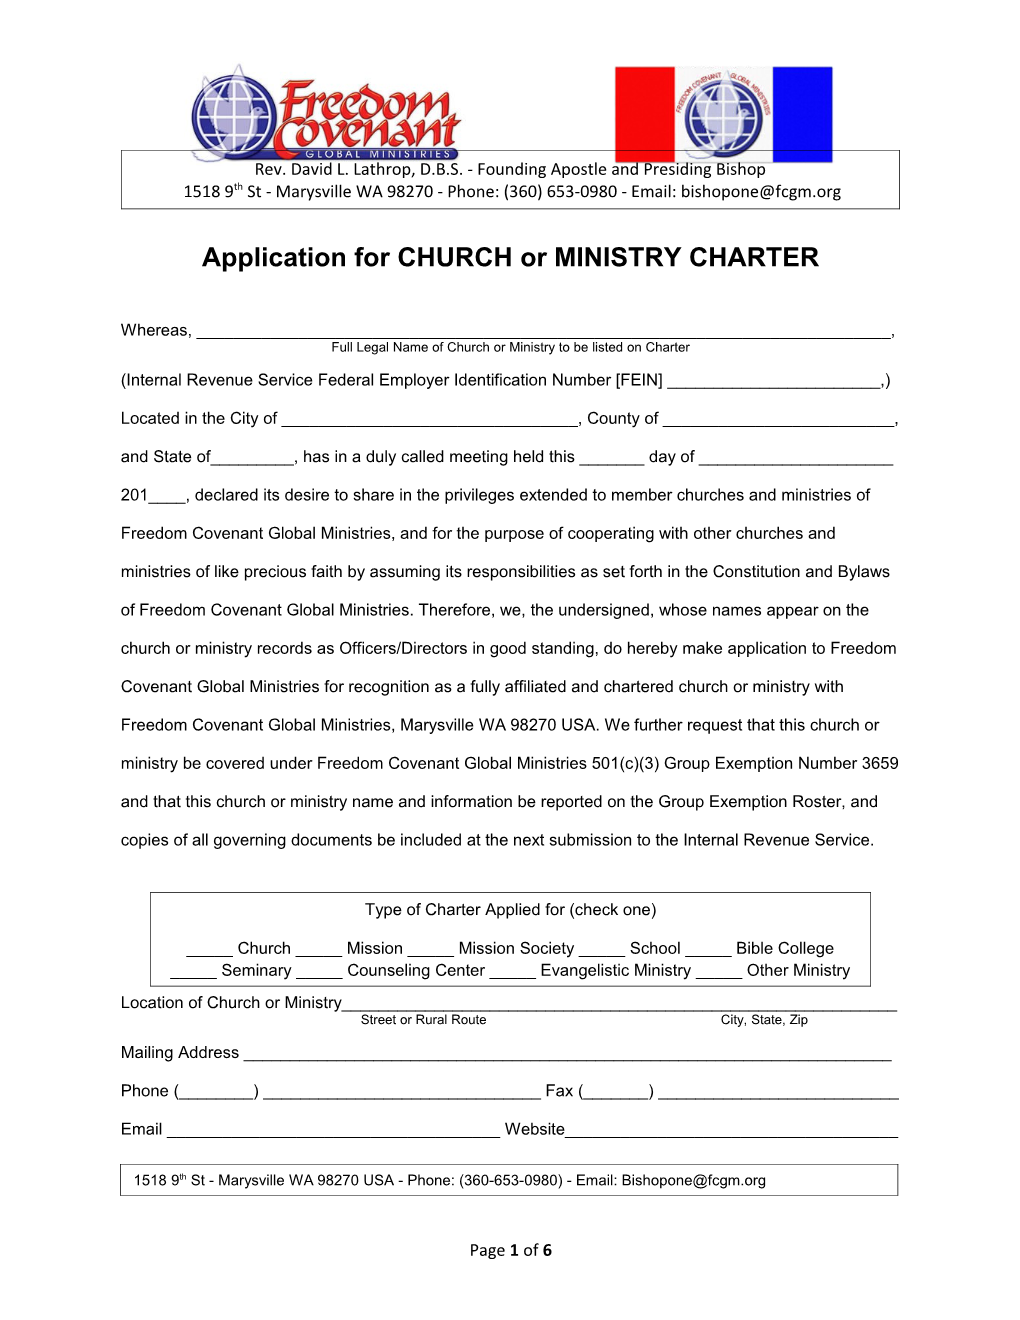 Application for CHURCH Or MINISTRY CHARTER